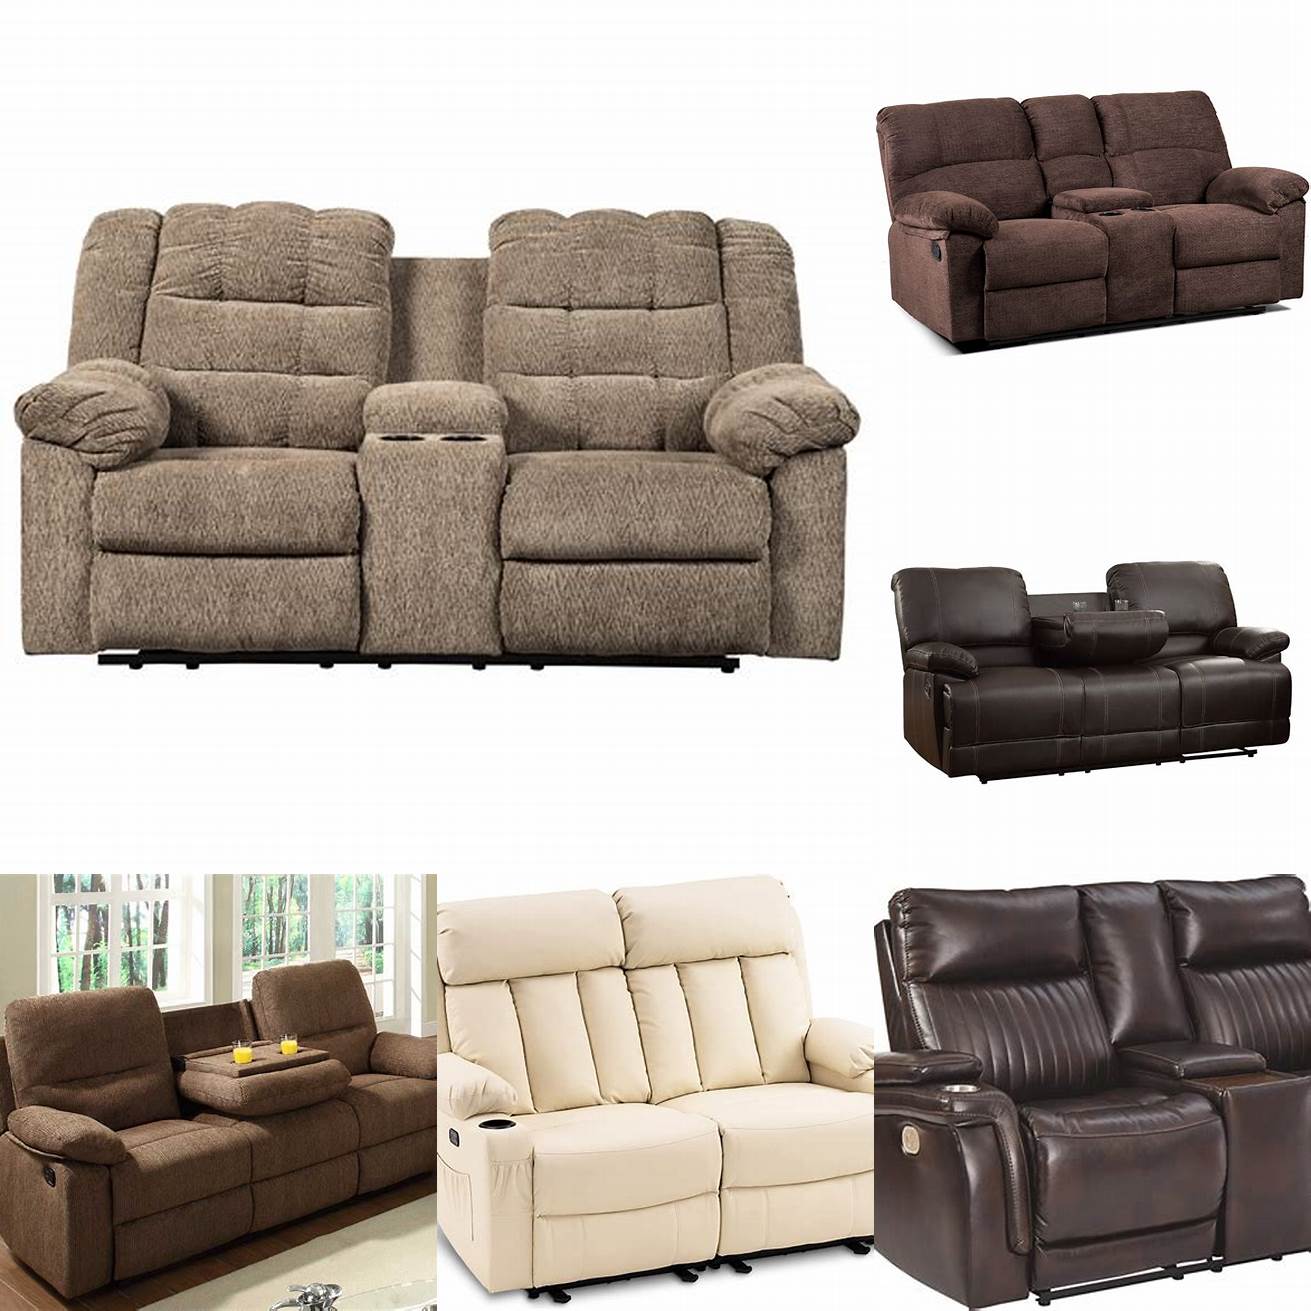 Double recliner sofa with cup holders